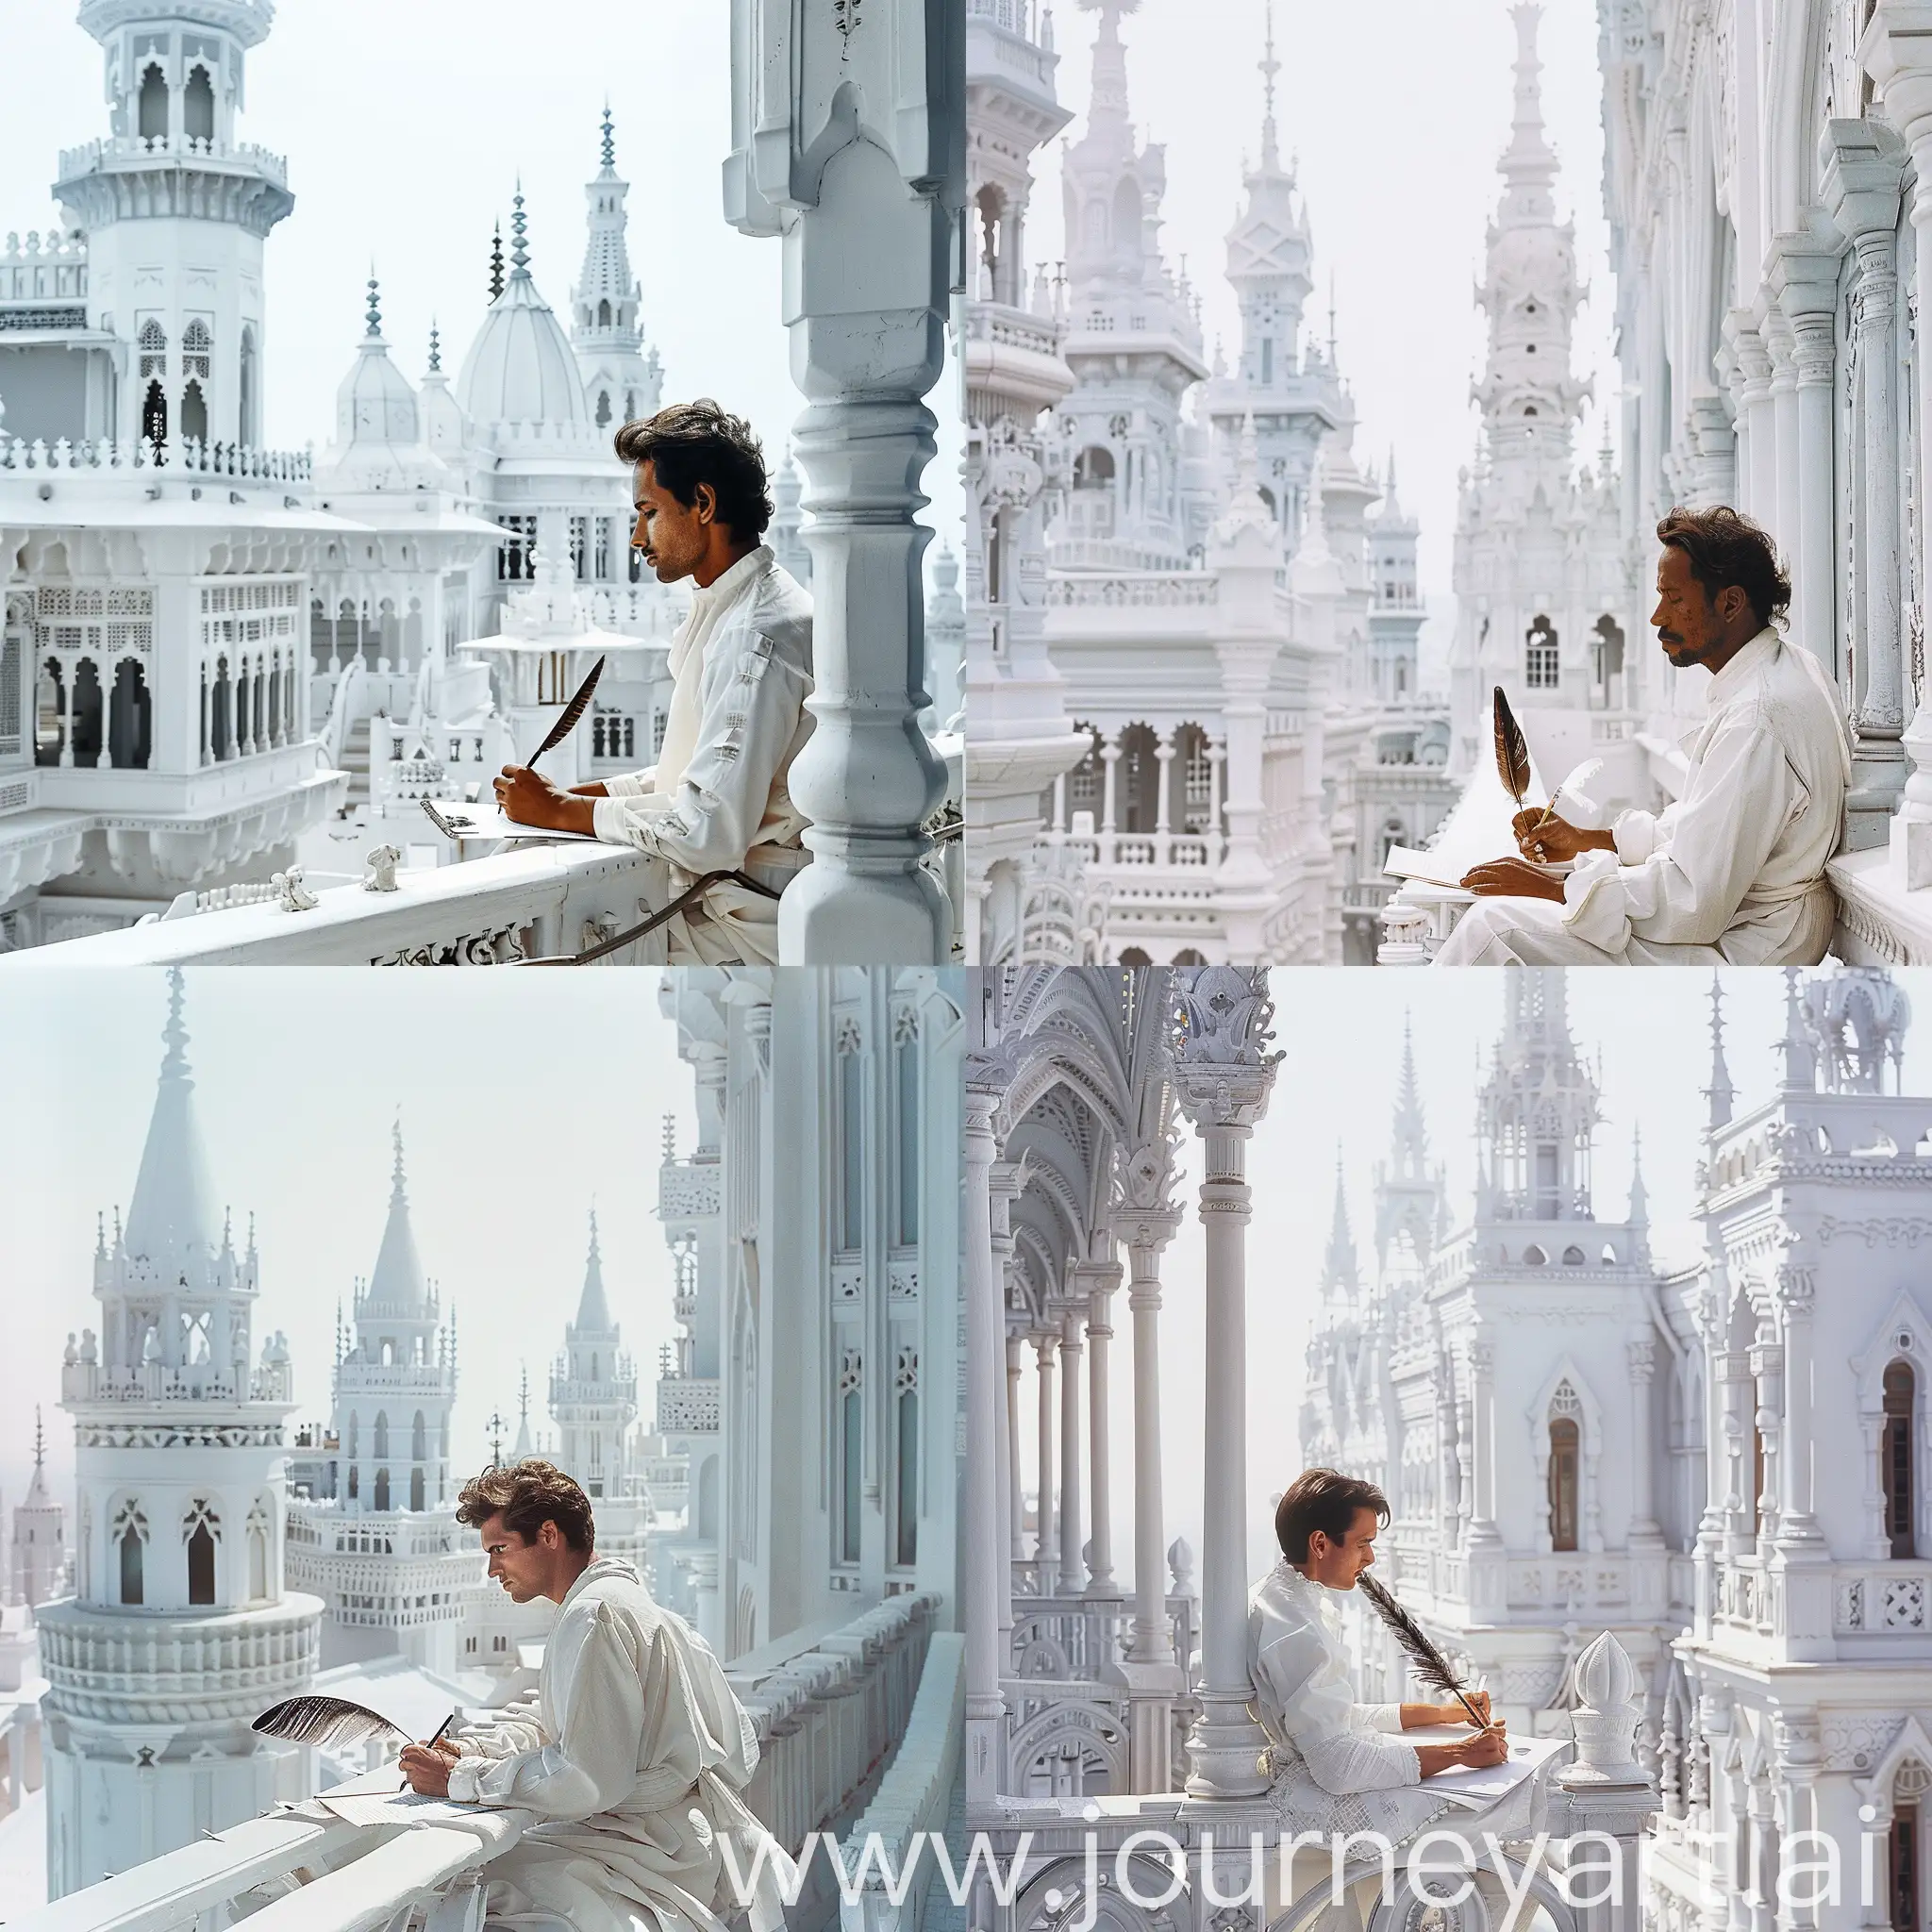 European-Man-Writing-with-Feather-Pen-on-White-Palace-Balcony